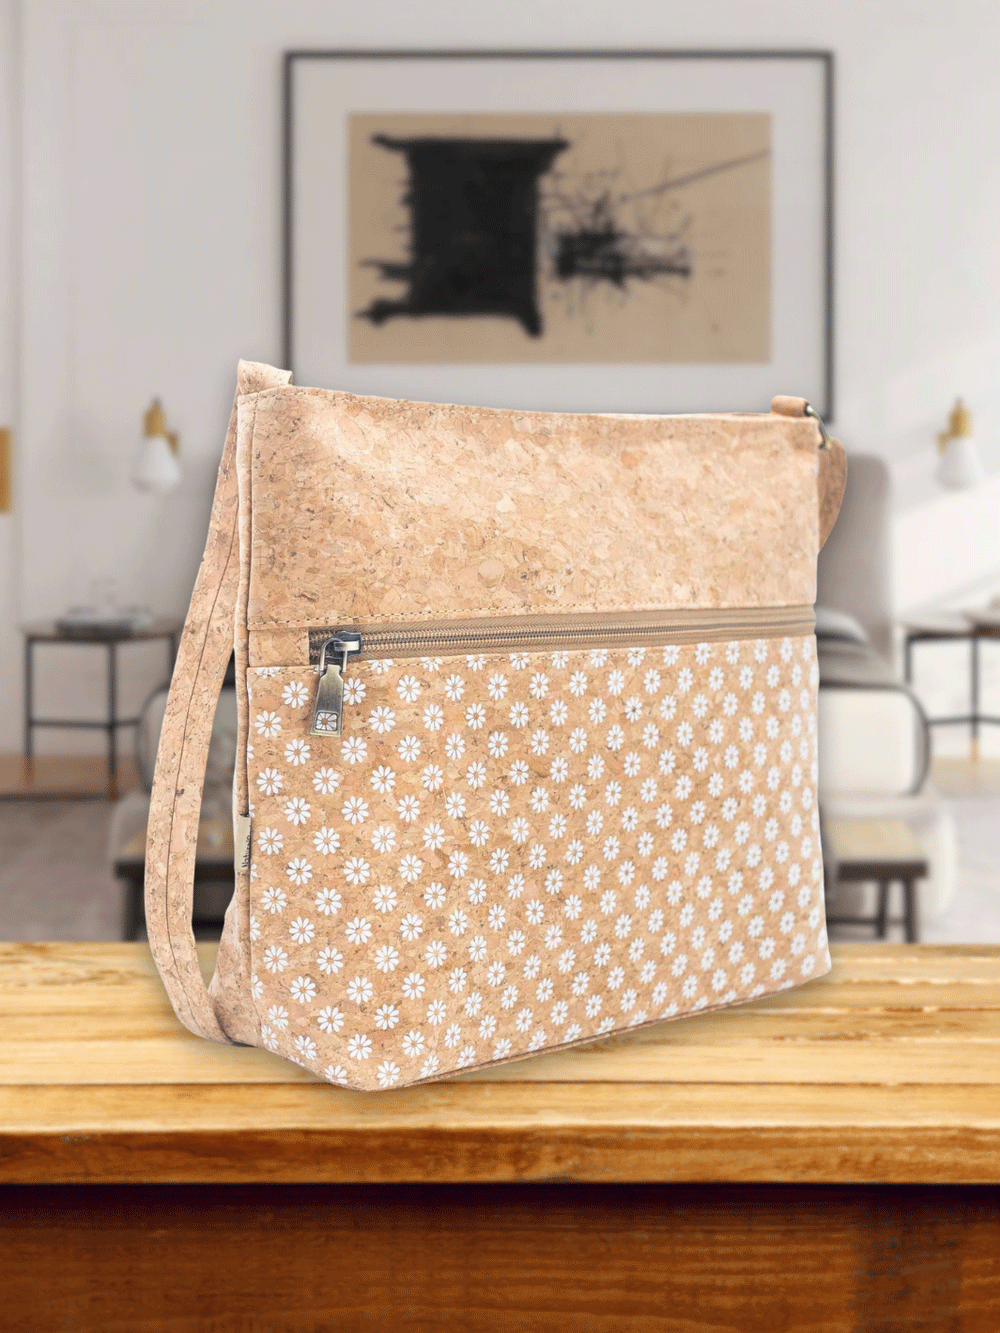 Stylish and eco-friendly cork shoulder bag crafted from natural Portuguese cork. Features adjustable strap, floral embellishments, and convenient pockets. Ideal for sustainable fashion enthusiasts.